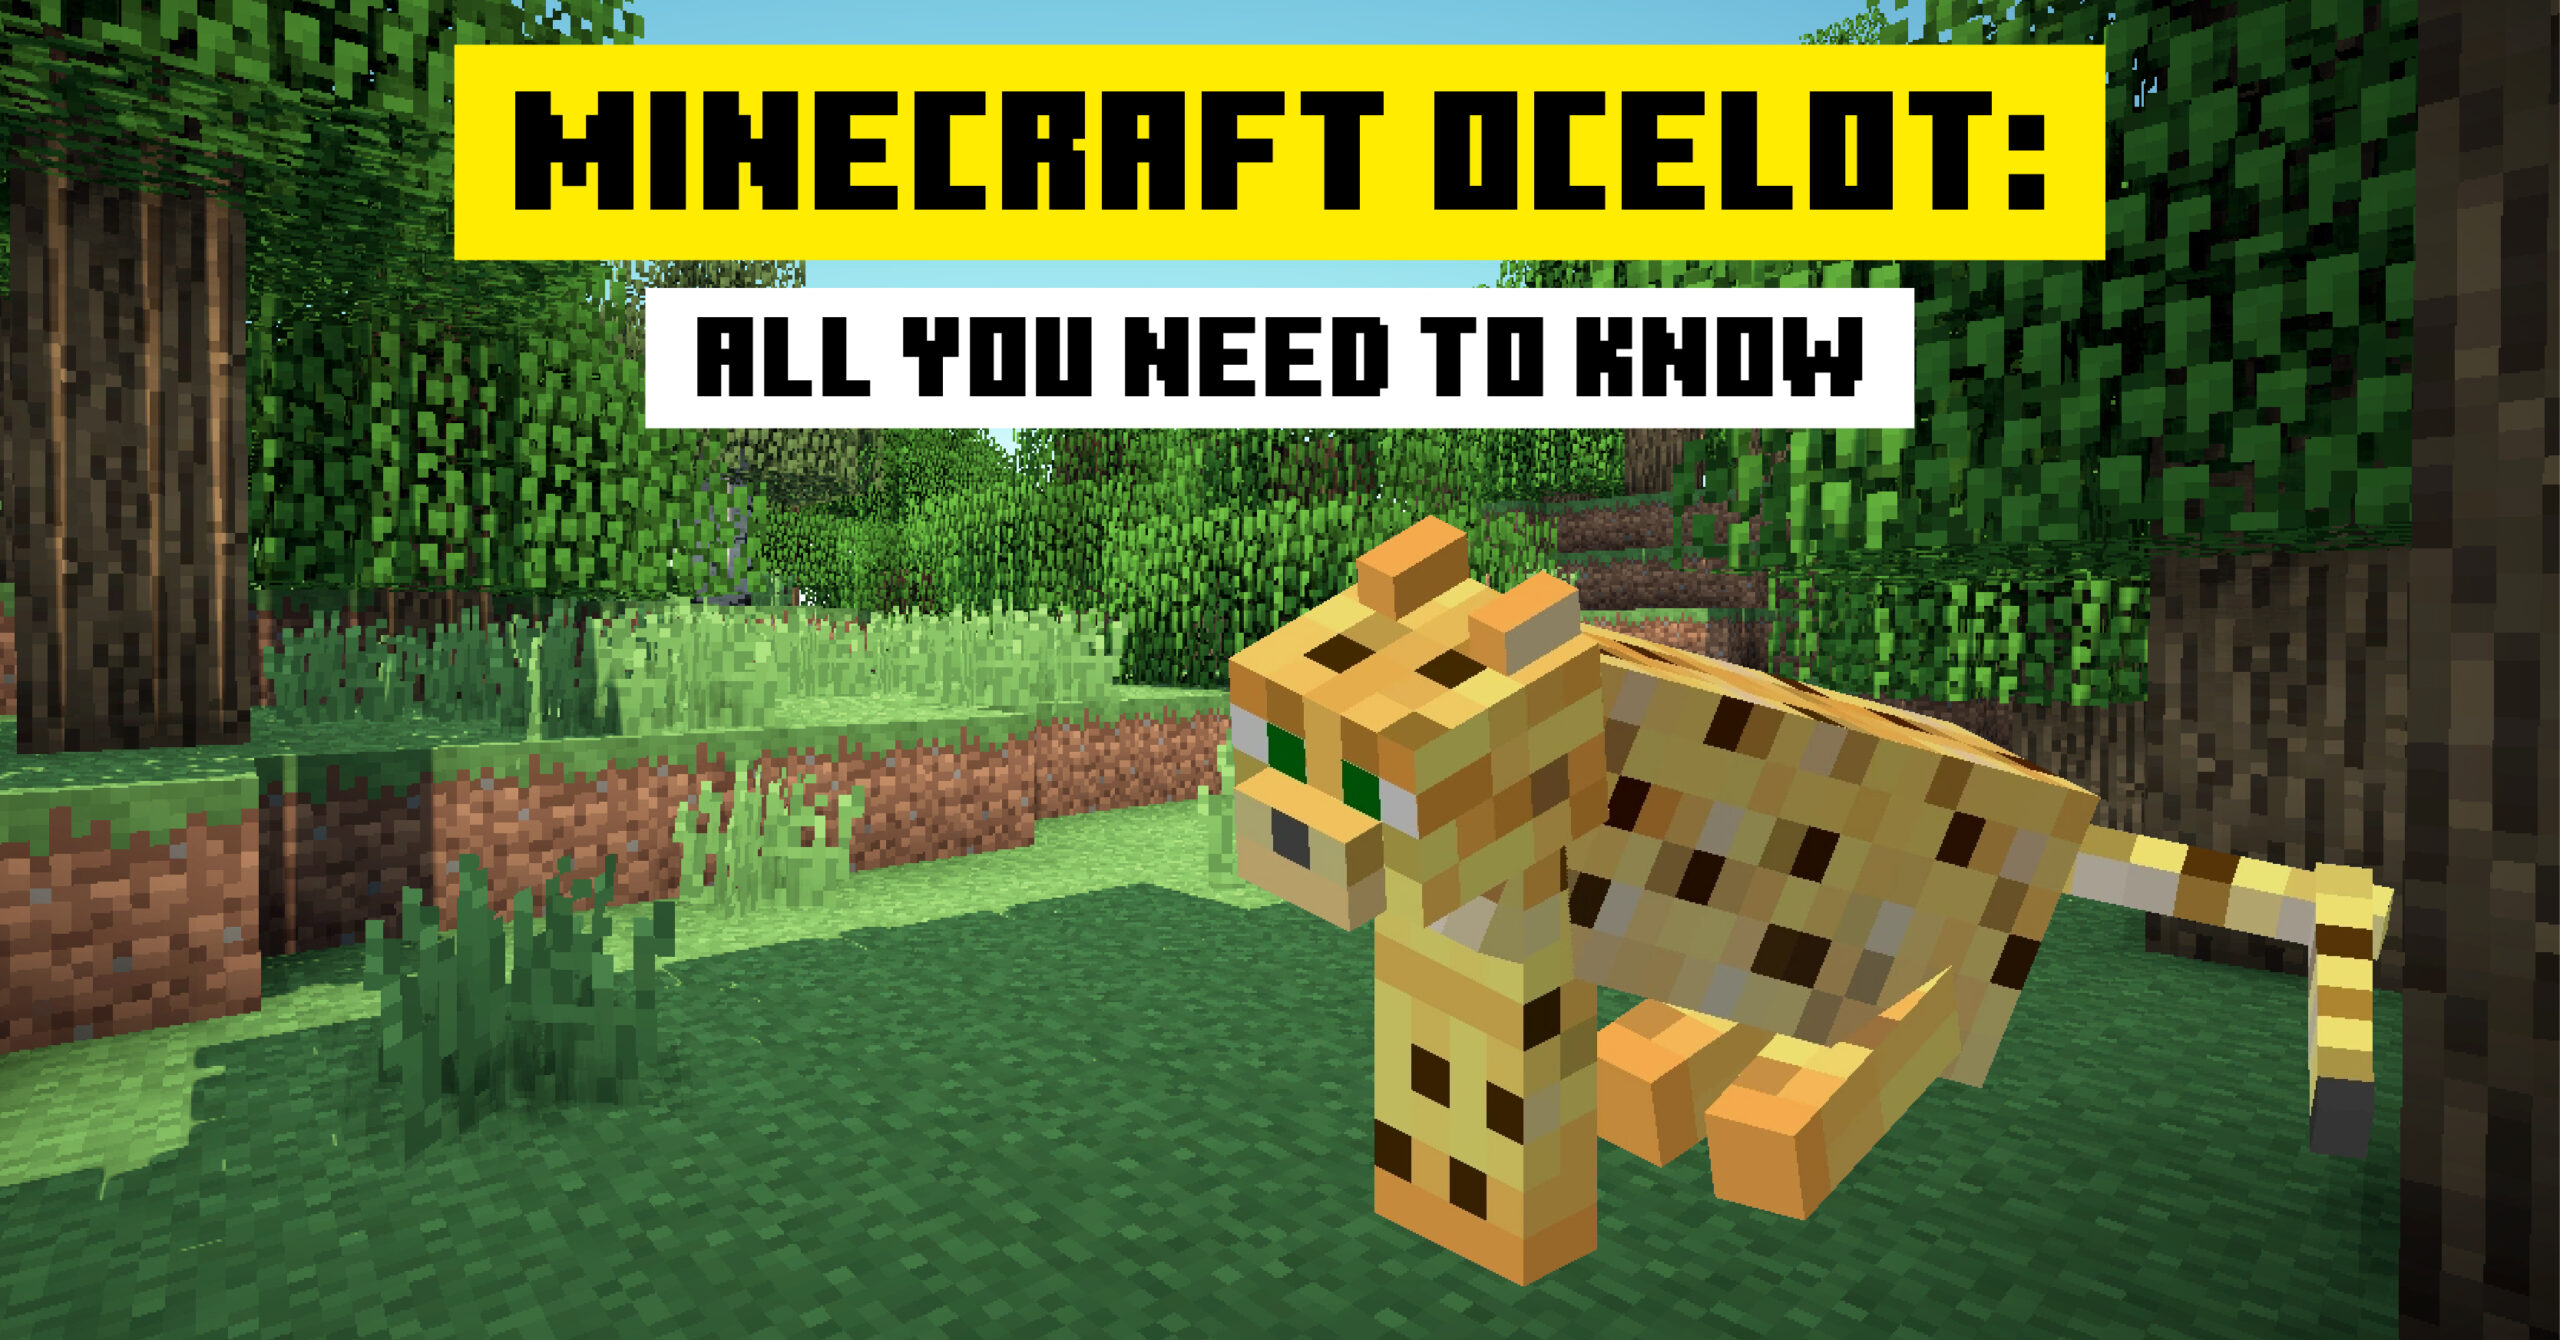 Minecraft Ocelot: All you need to Know